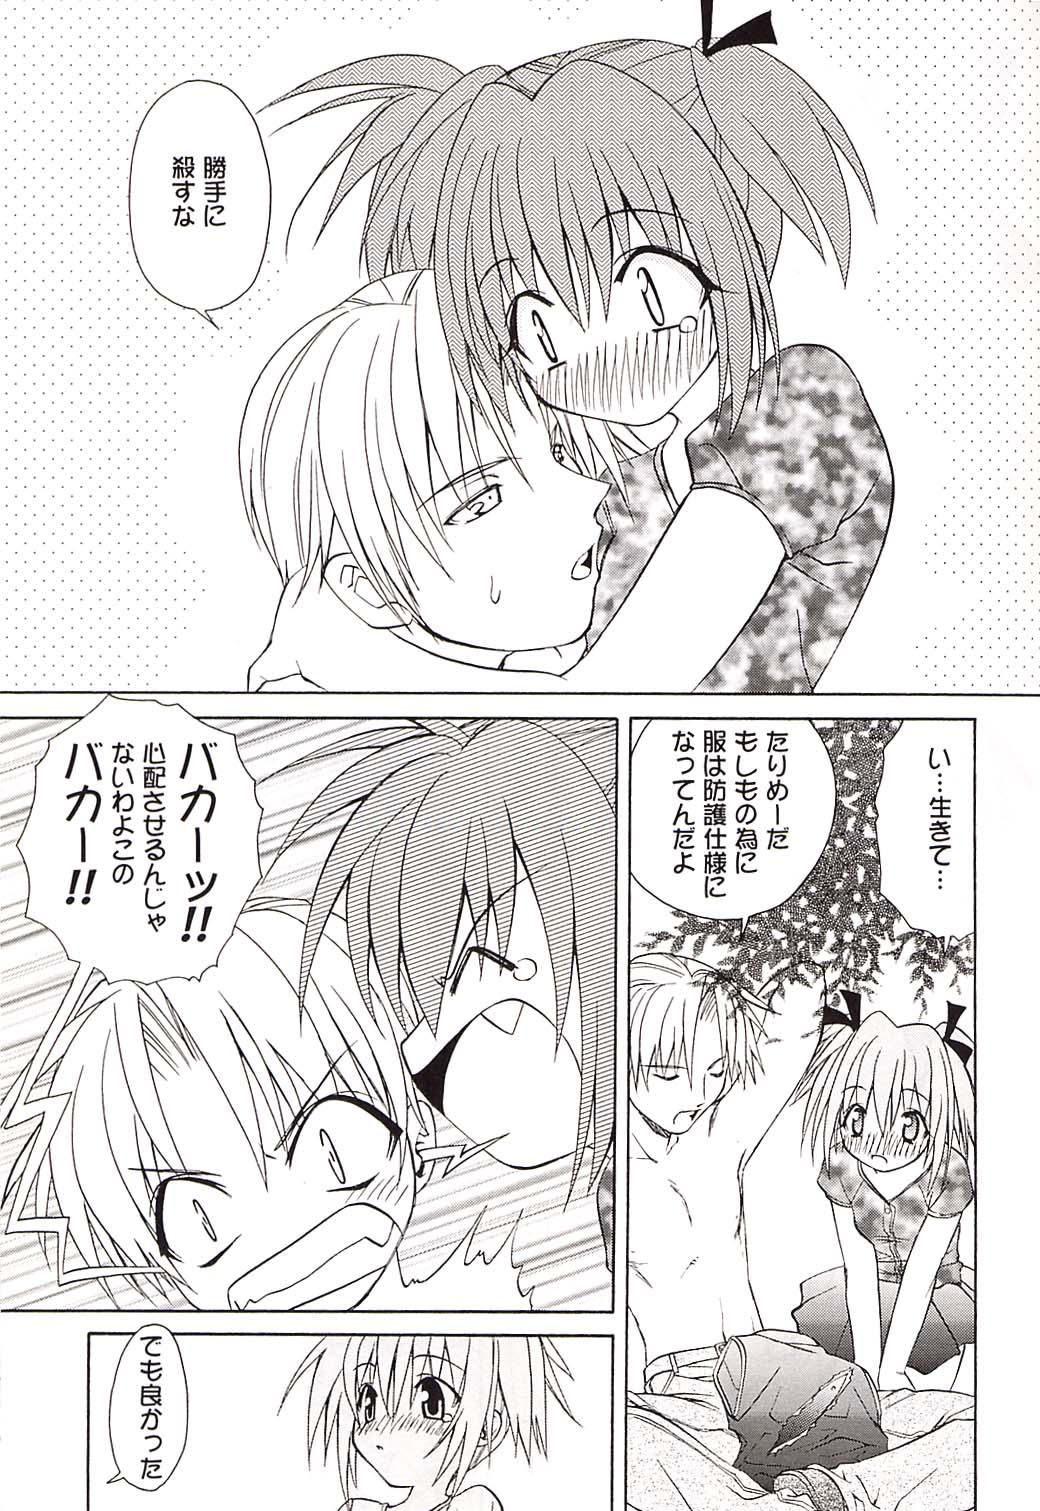 Anal Play Strawberry sex - Tokyo mew mew Gays - Page 12